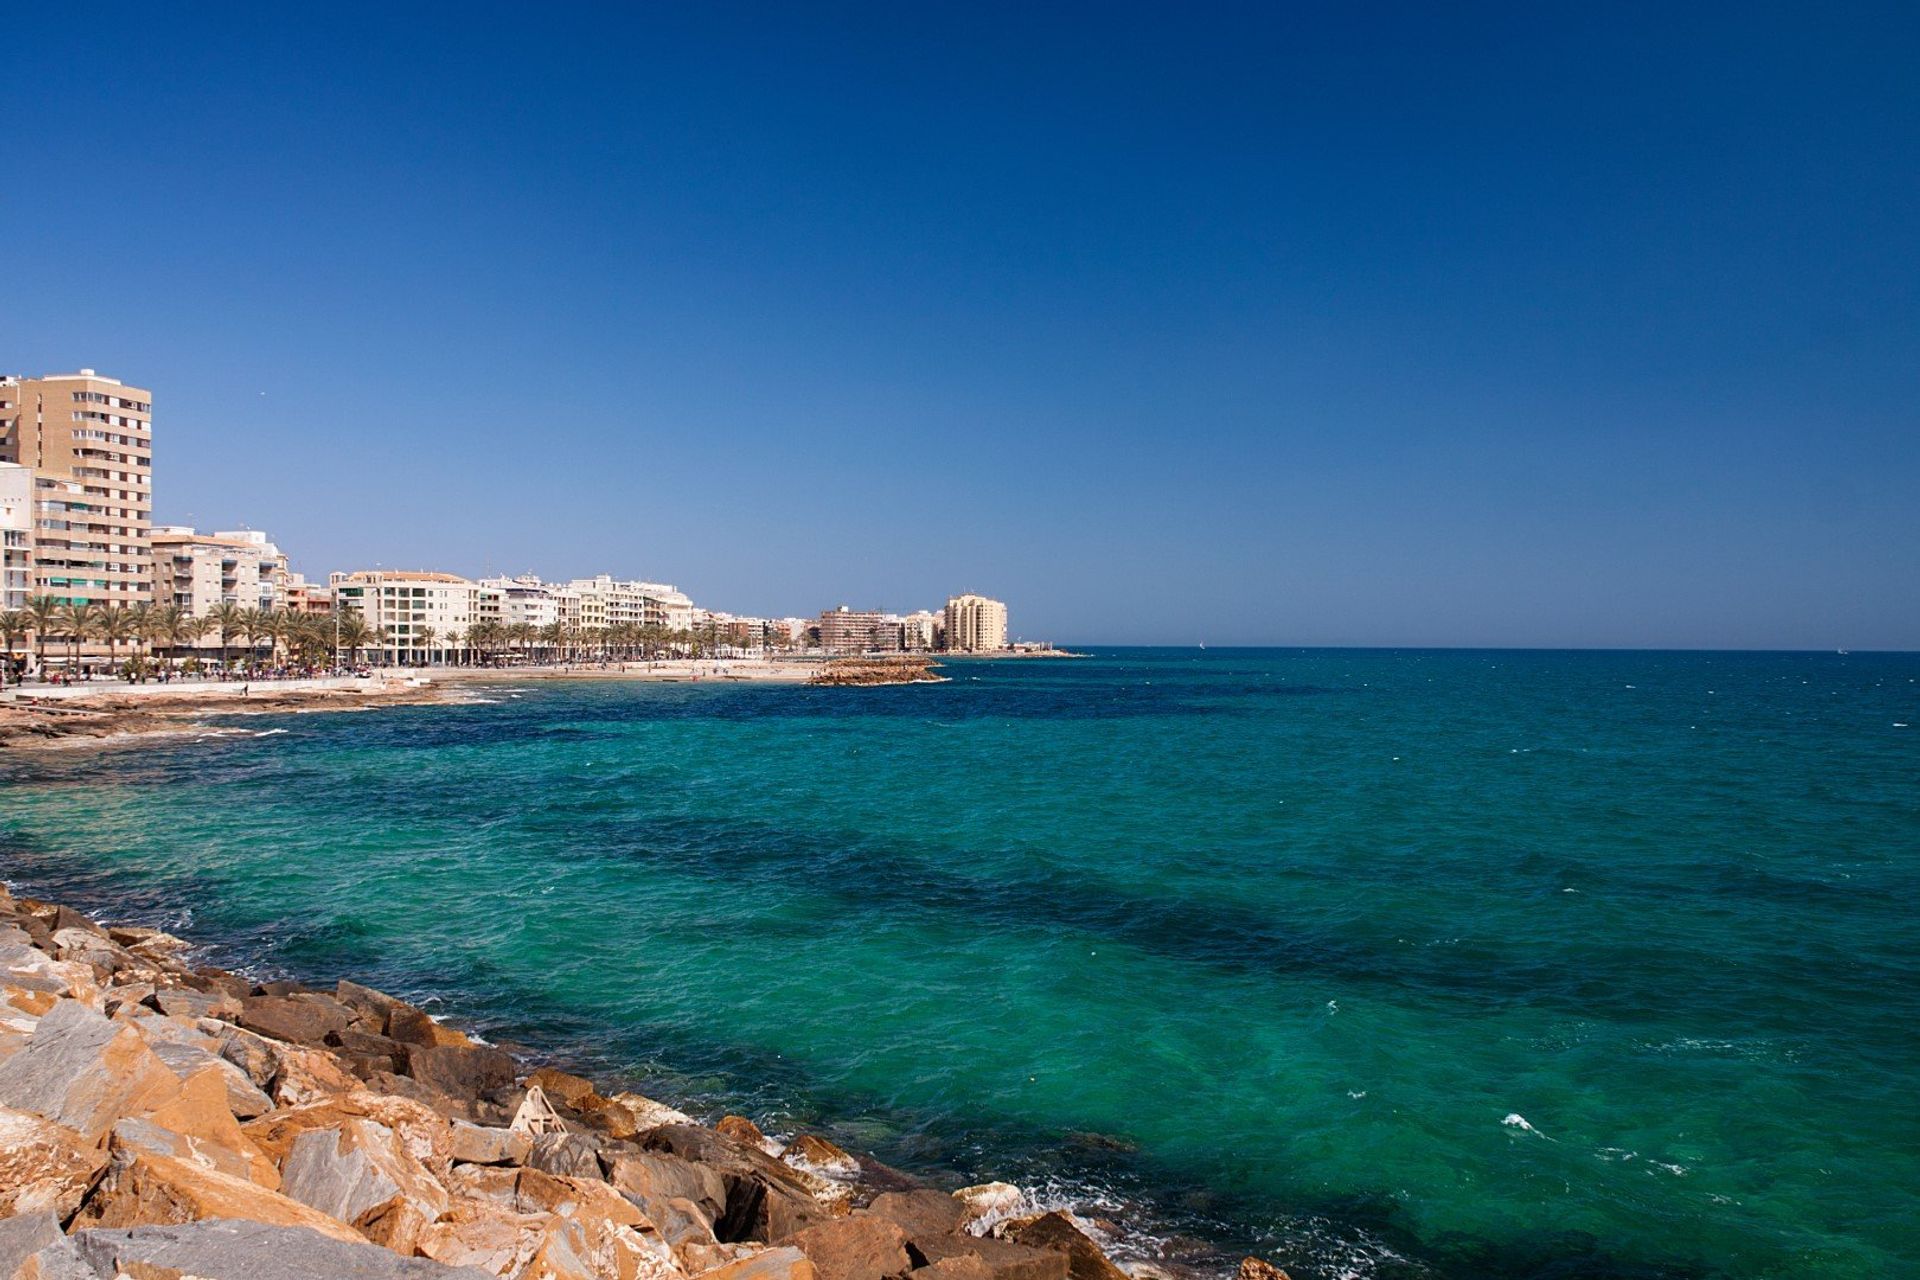 Torrevieja's beautiful local beach, a paradise for families, sun-worshippers and holidaymakers alike